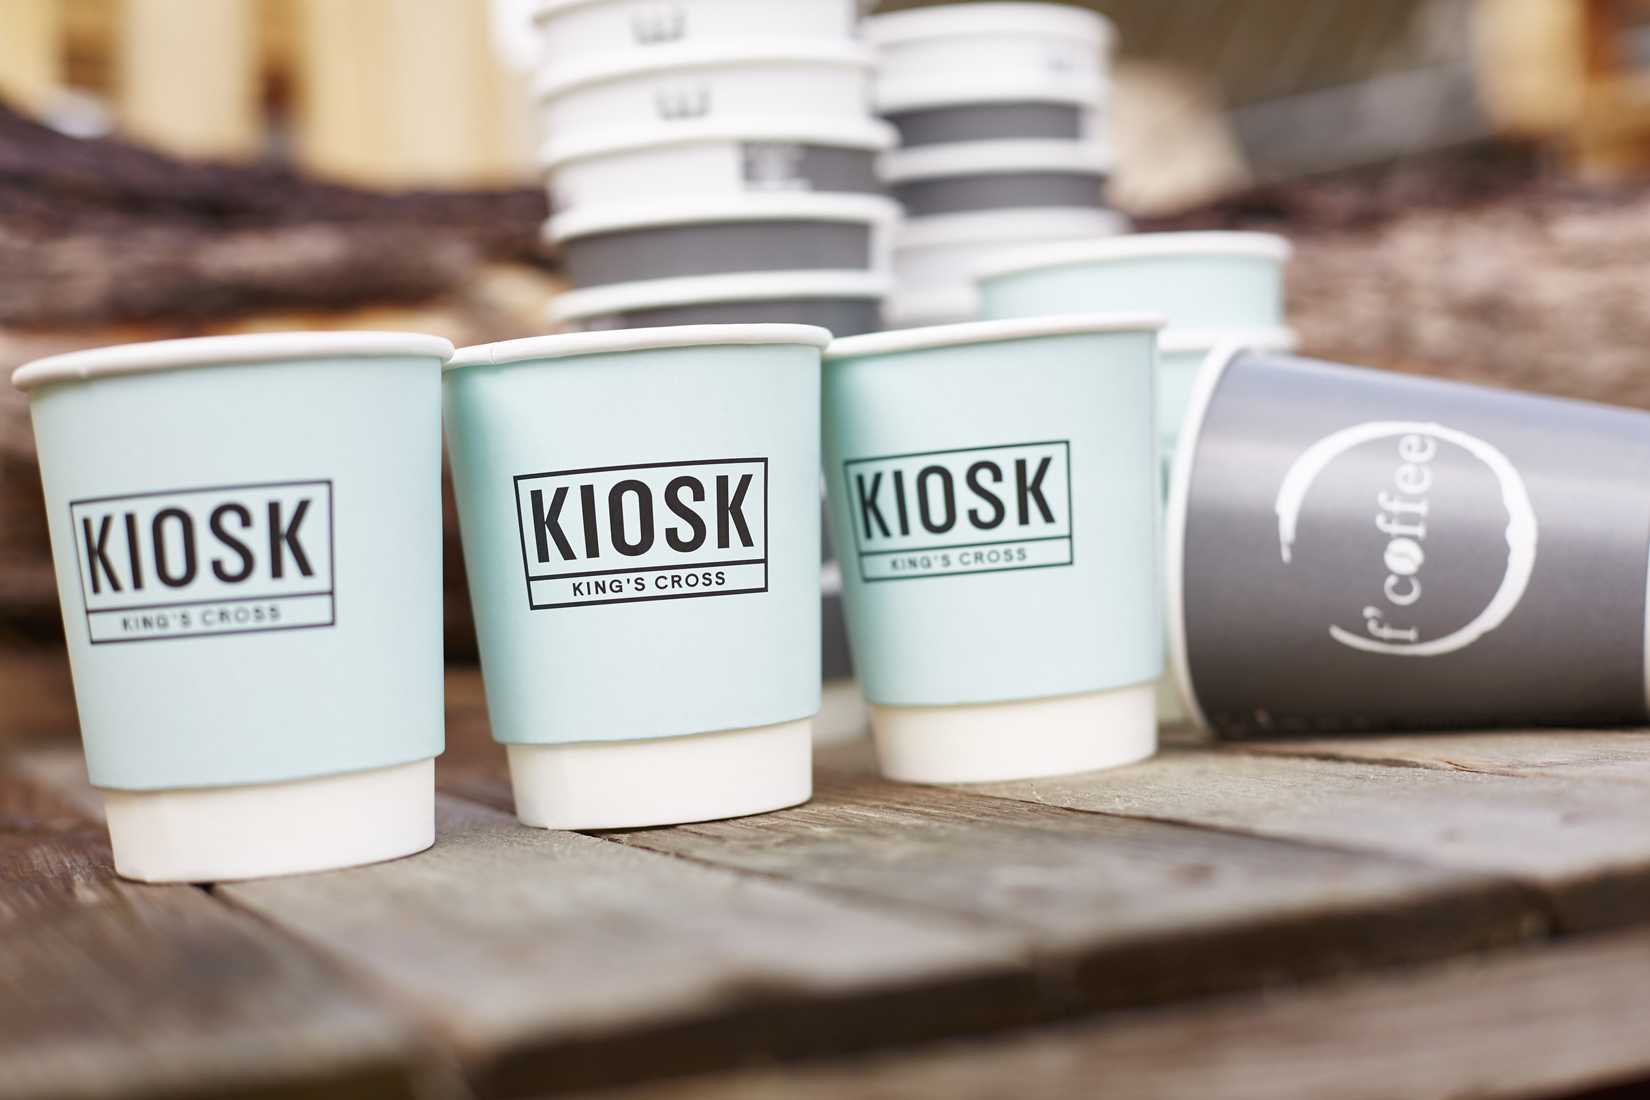 Paper Cup Market To Make A Quantum Leap Boosted By Coffee On The Go